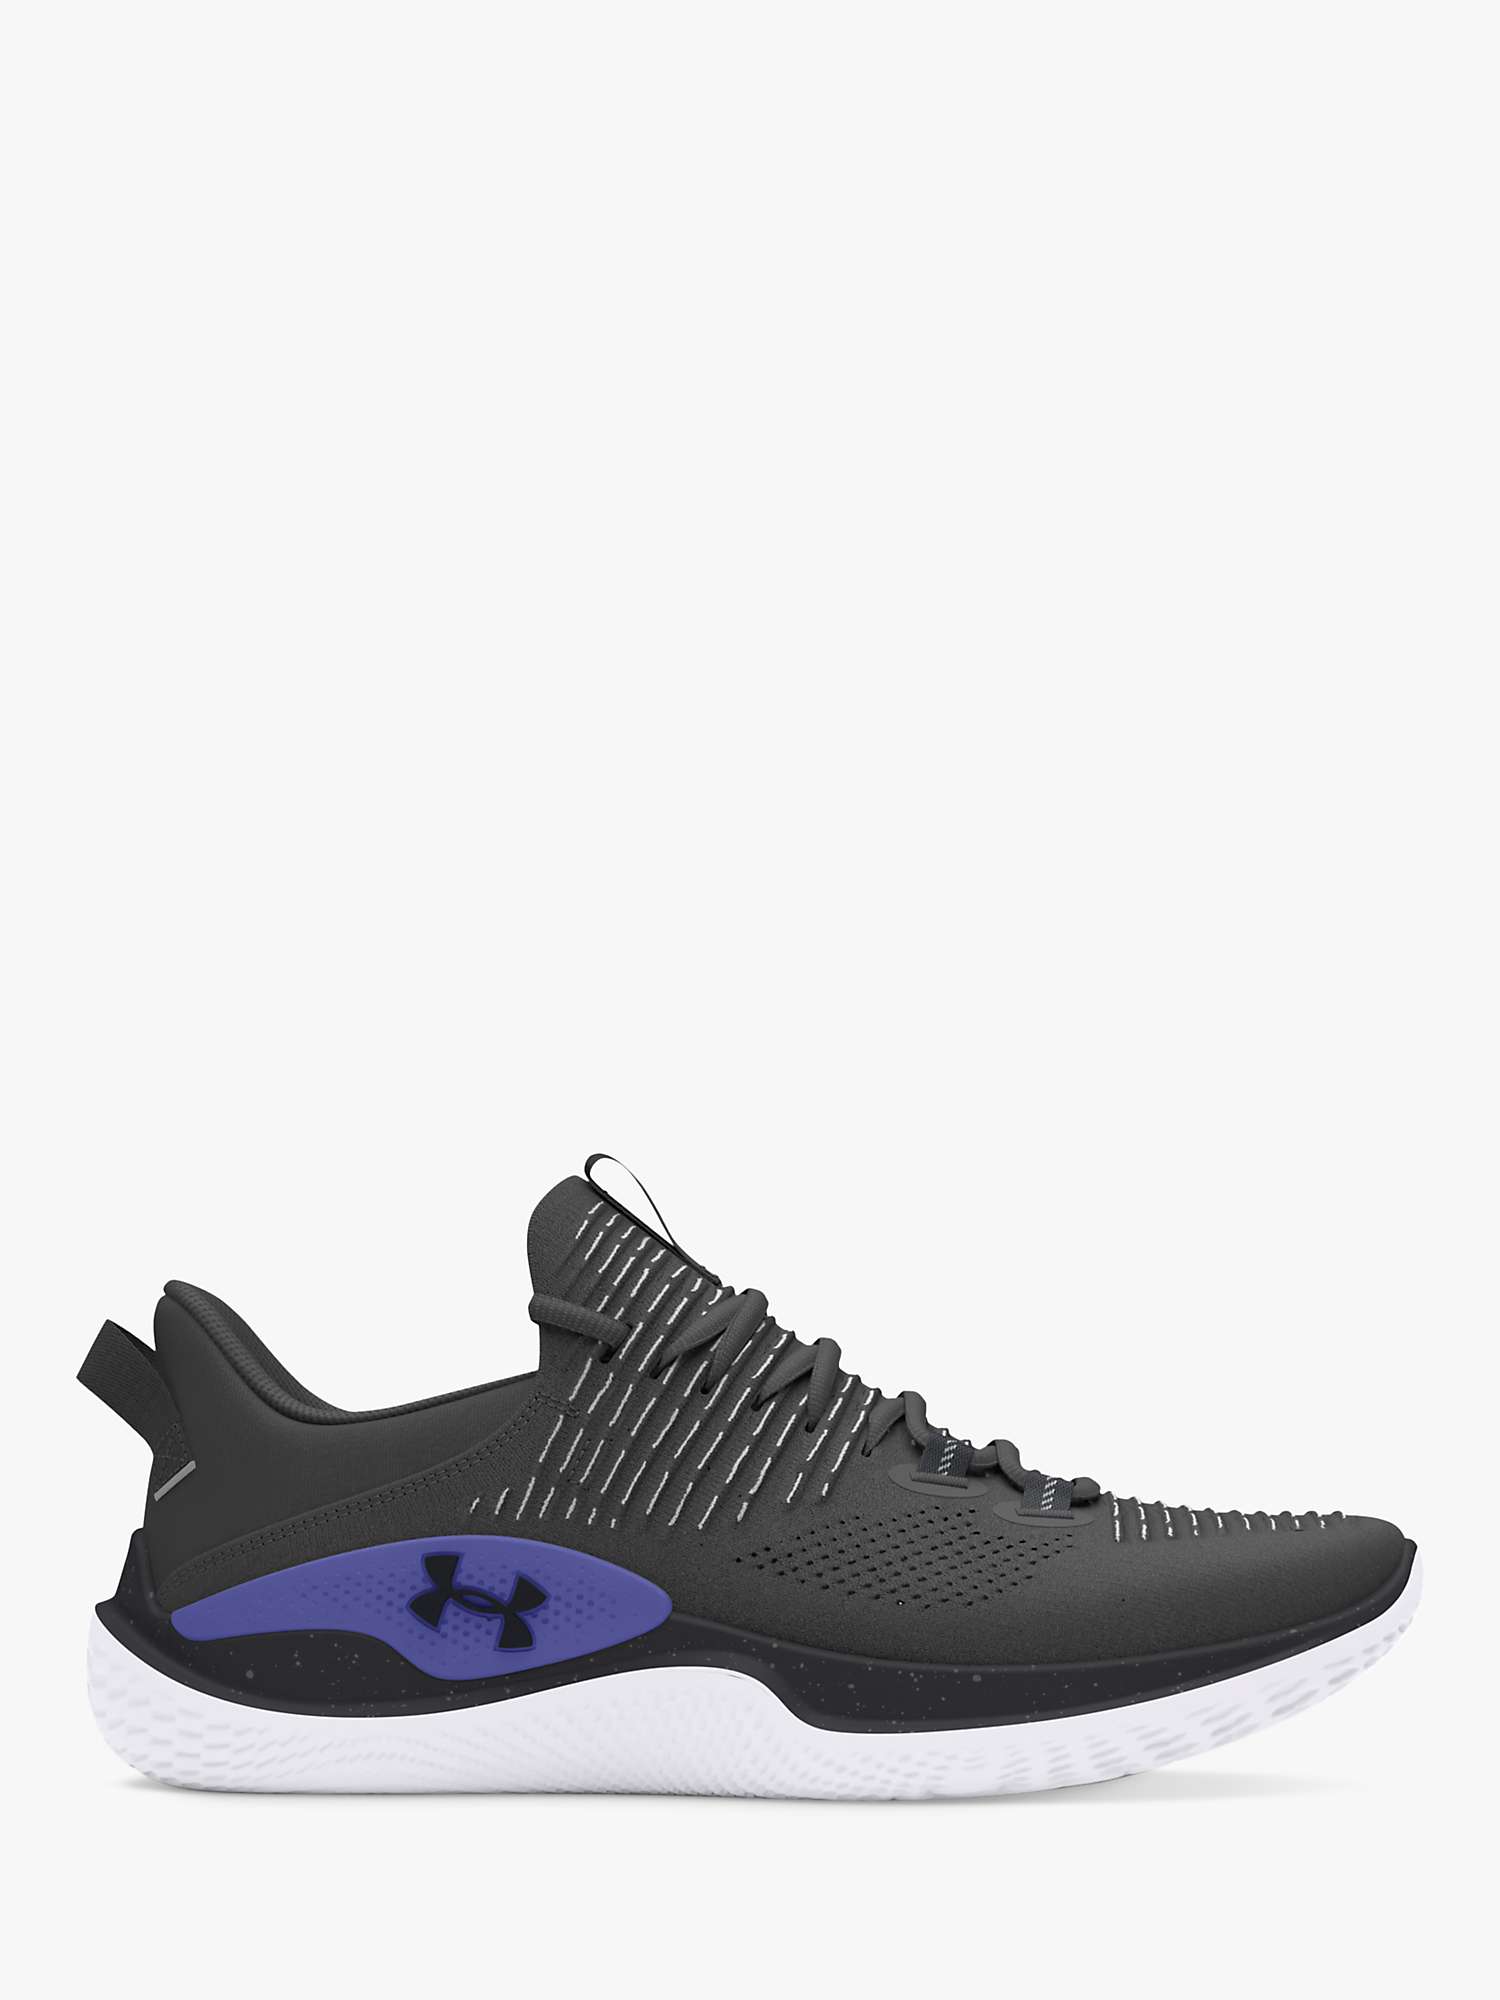 Buy Under Armour Dynamic Training Shoes, Grey/Black Online at johnlewis.com